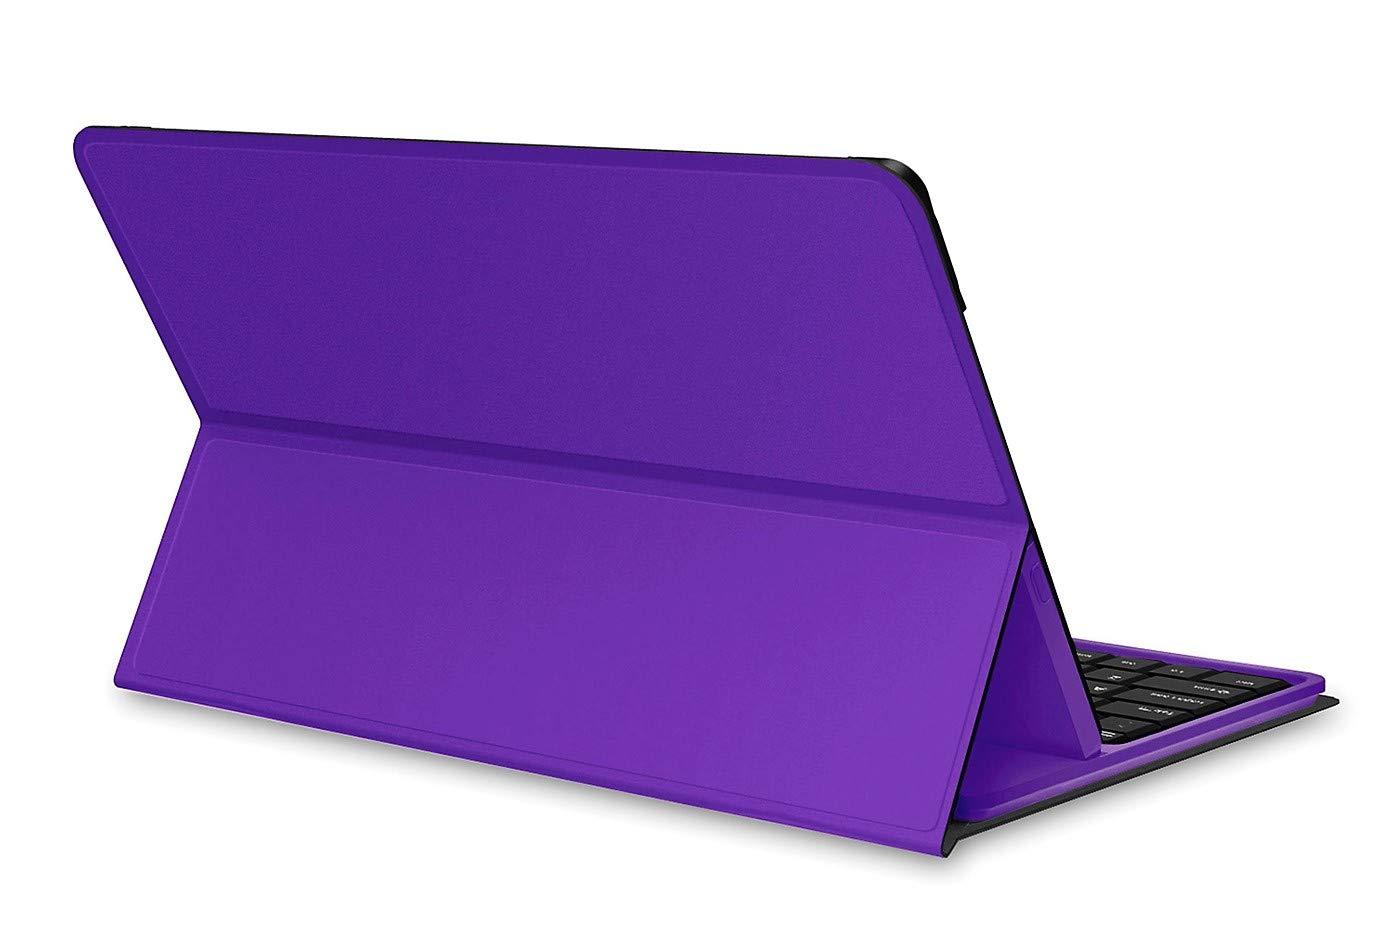 RCA Viking Pro Tablet w/Folio Keyboard 10" Multi-Touch Display, Android (Go Edition), Purple